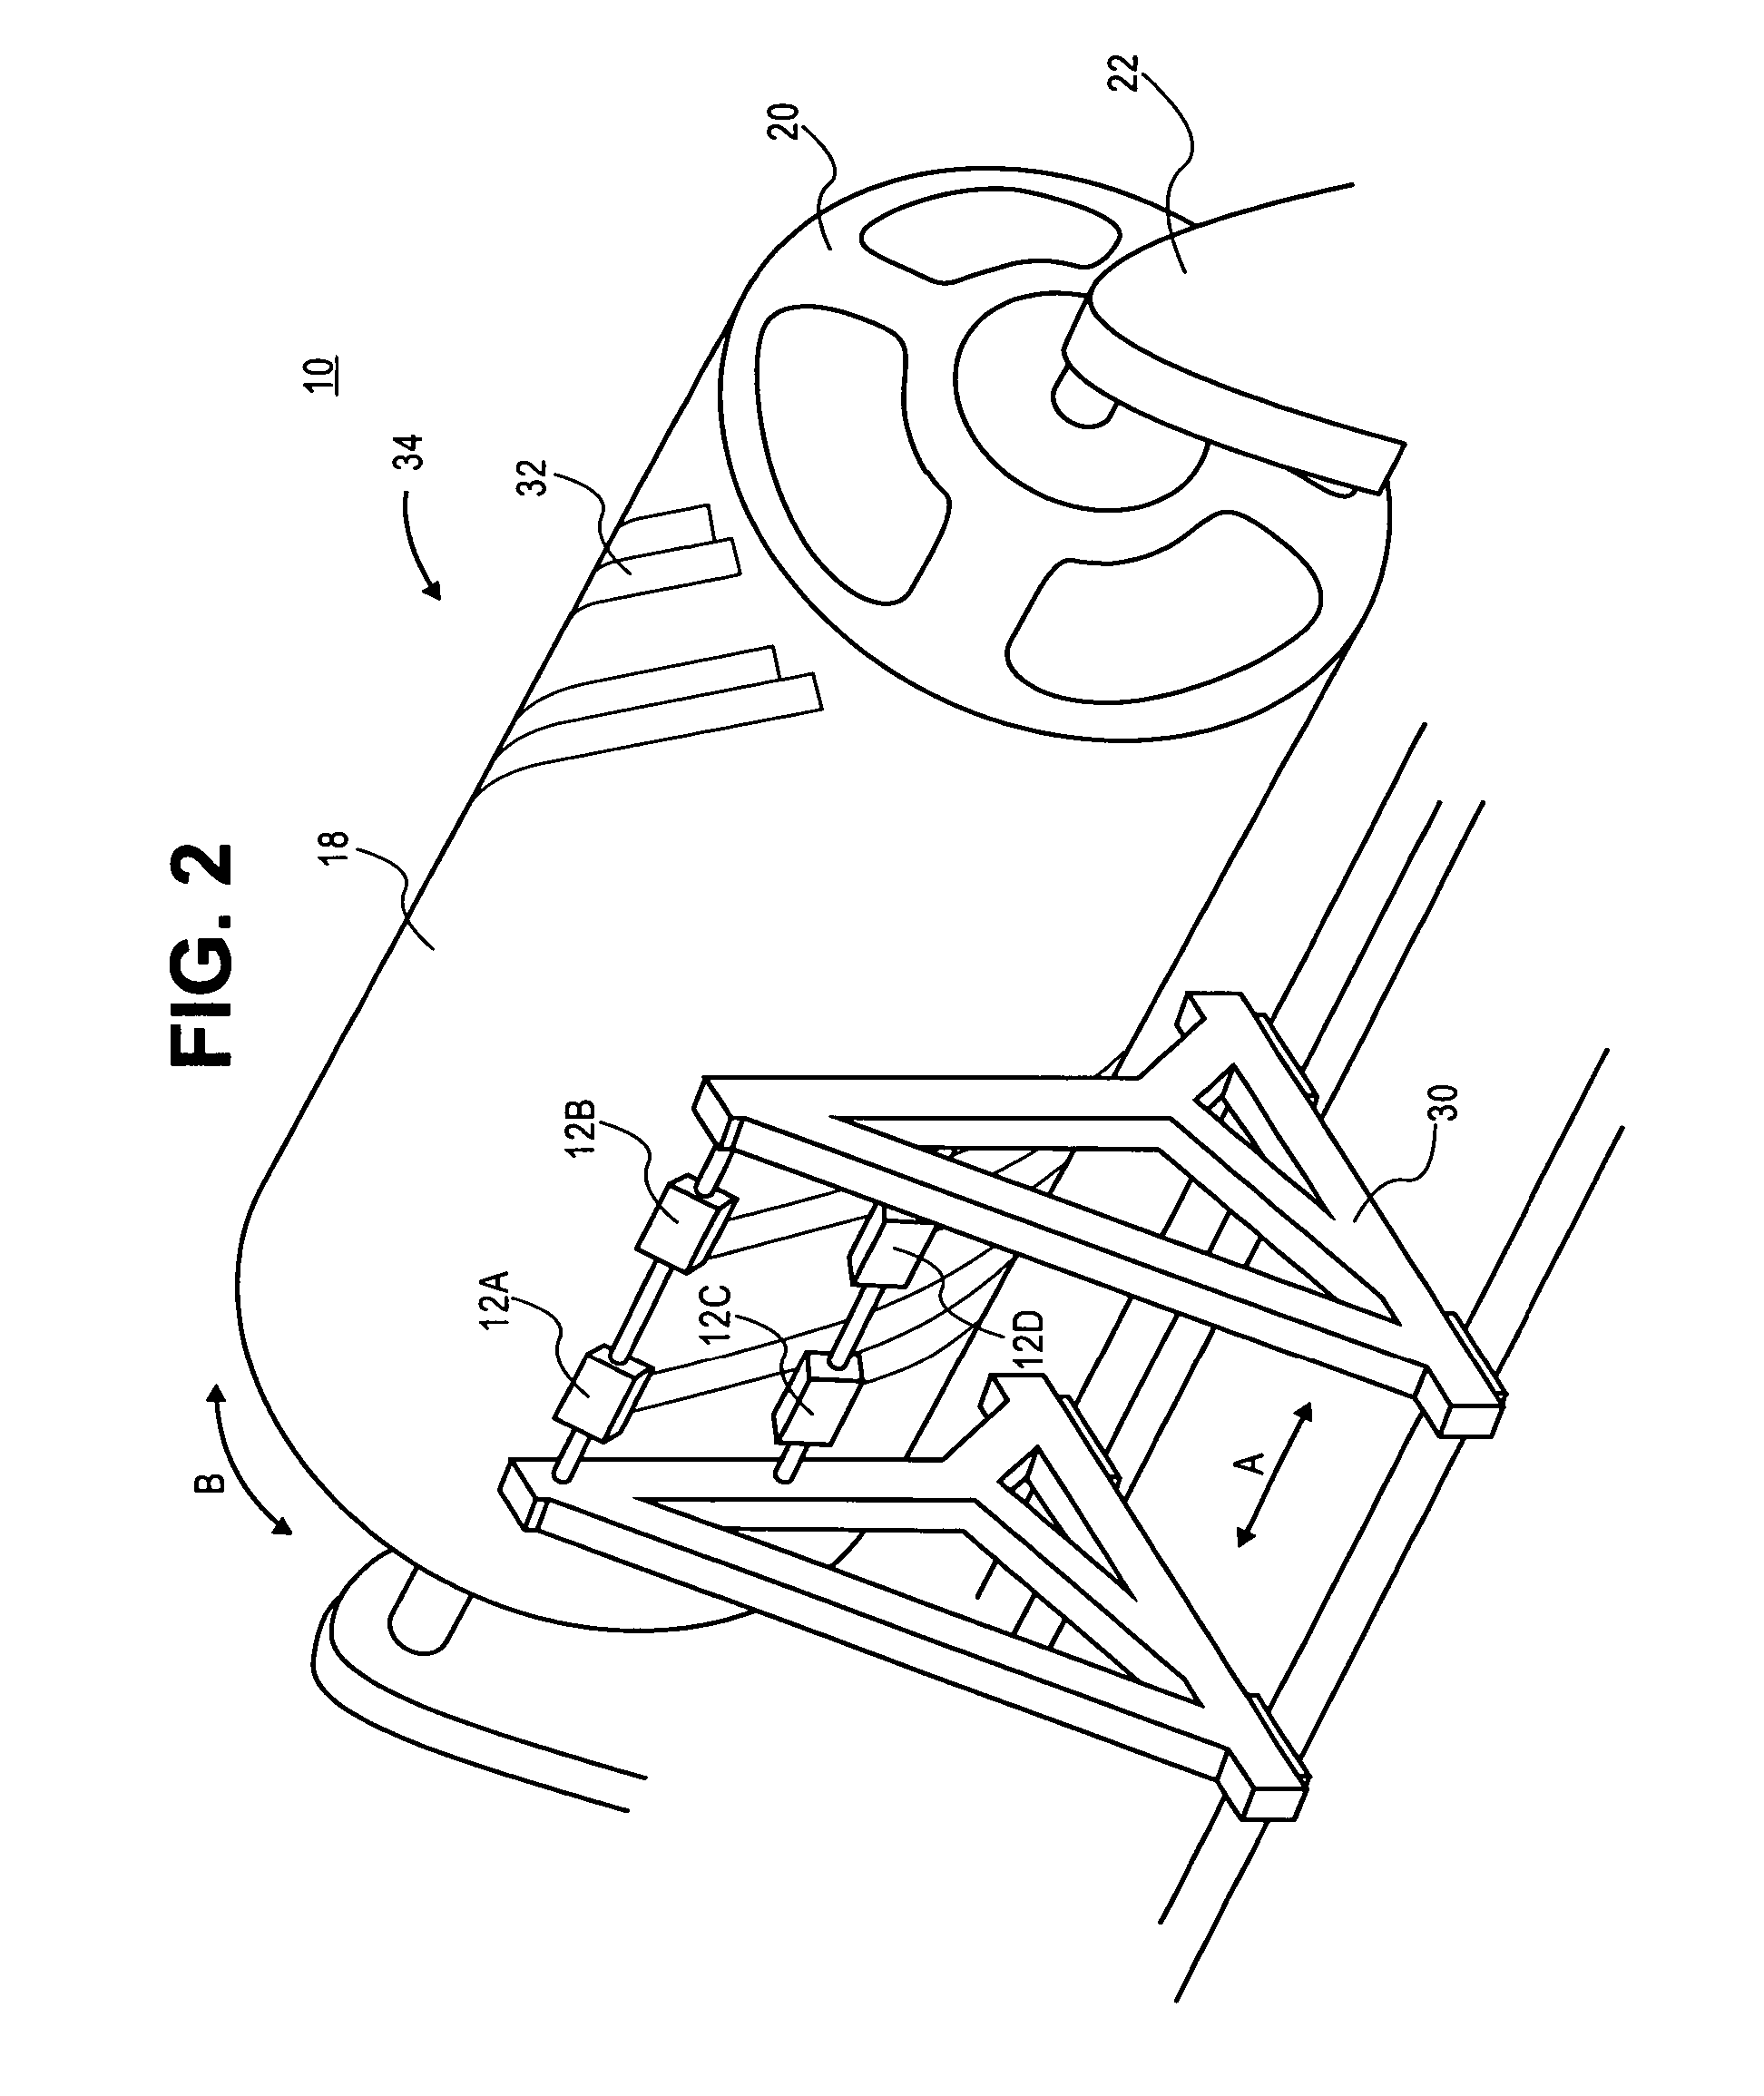 Composite material placement method and system